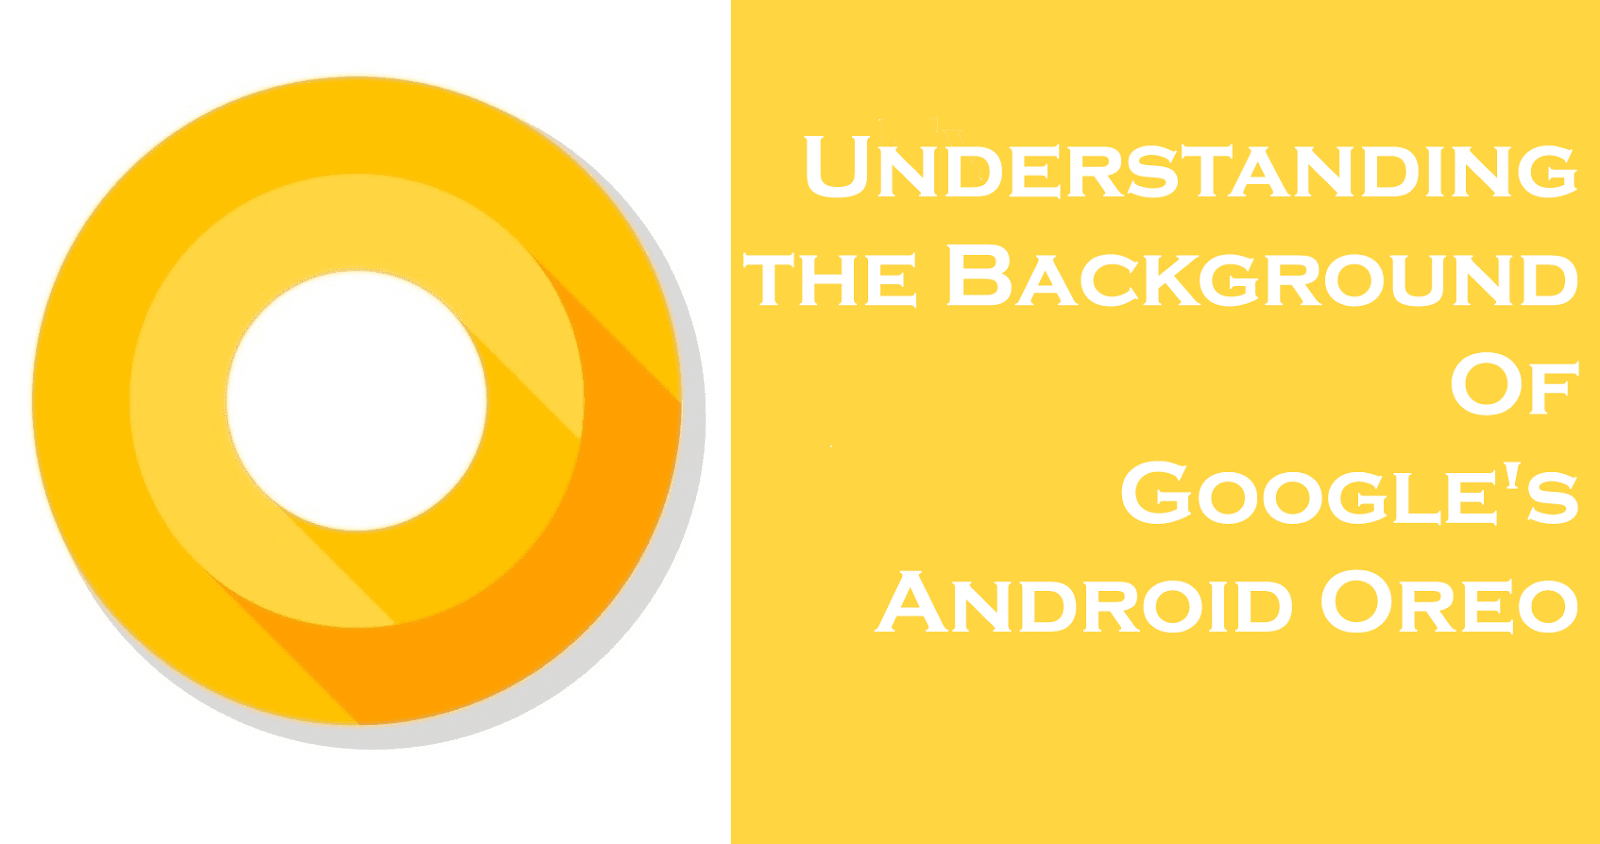 Understanding The Background Of Google's Android Oreo